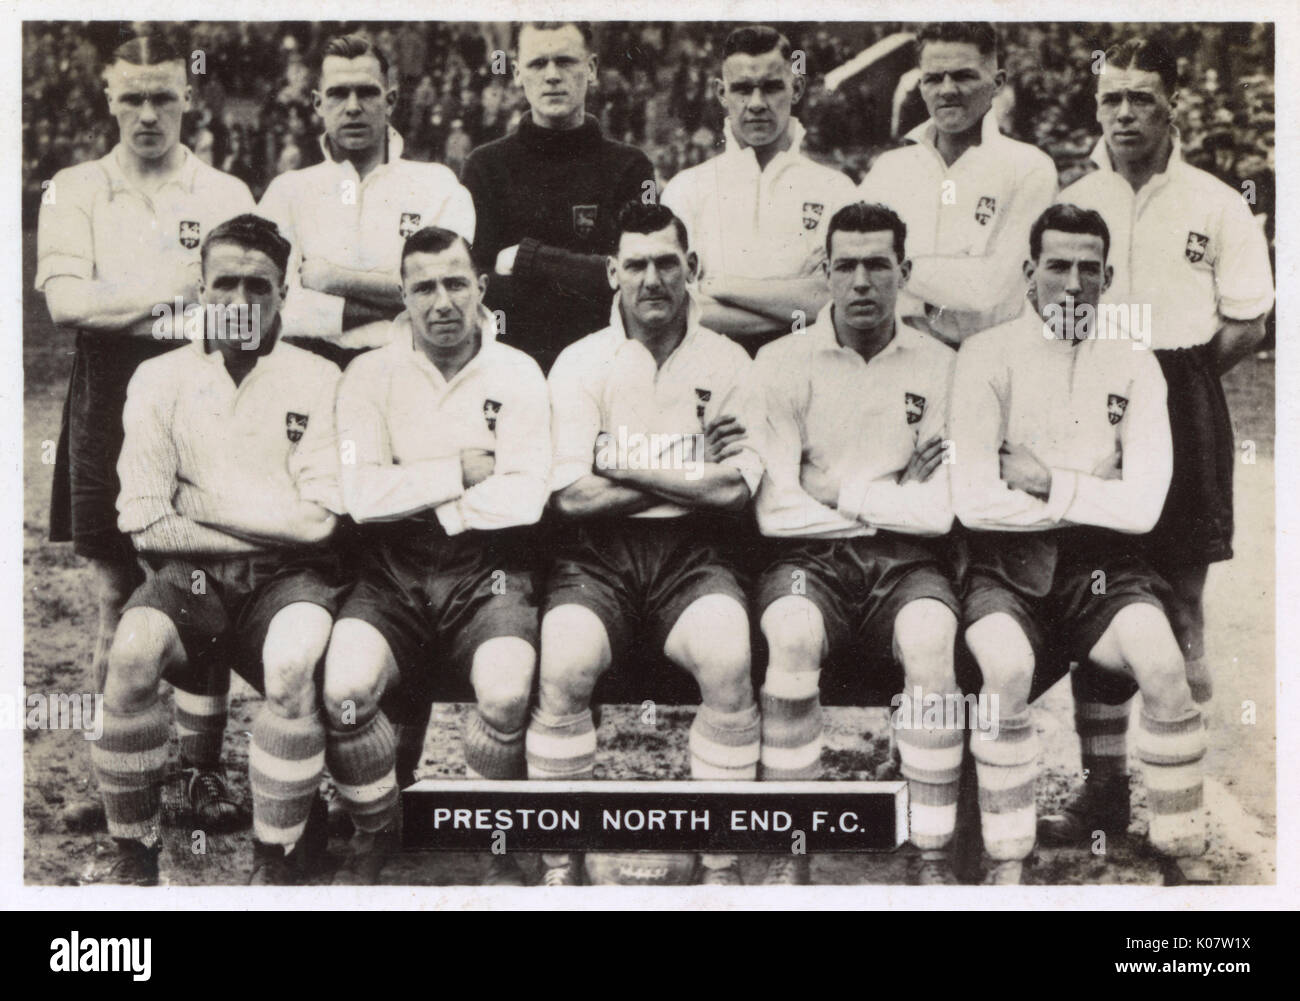 Preston North End FC football team 1936. Bancata posteriore: Shankly, Gallimore, Holdcroft, Lowe, Milne, Maxwell. Bancata anteriore: Dougal, Beresford, Tremelling (Capitano), O'Donnell, O'Donnell. Data: 1936 Foto Stock